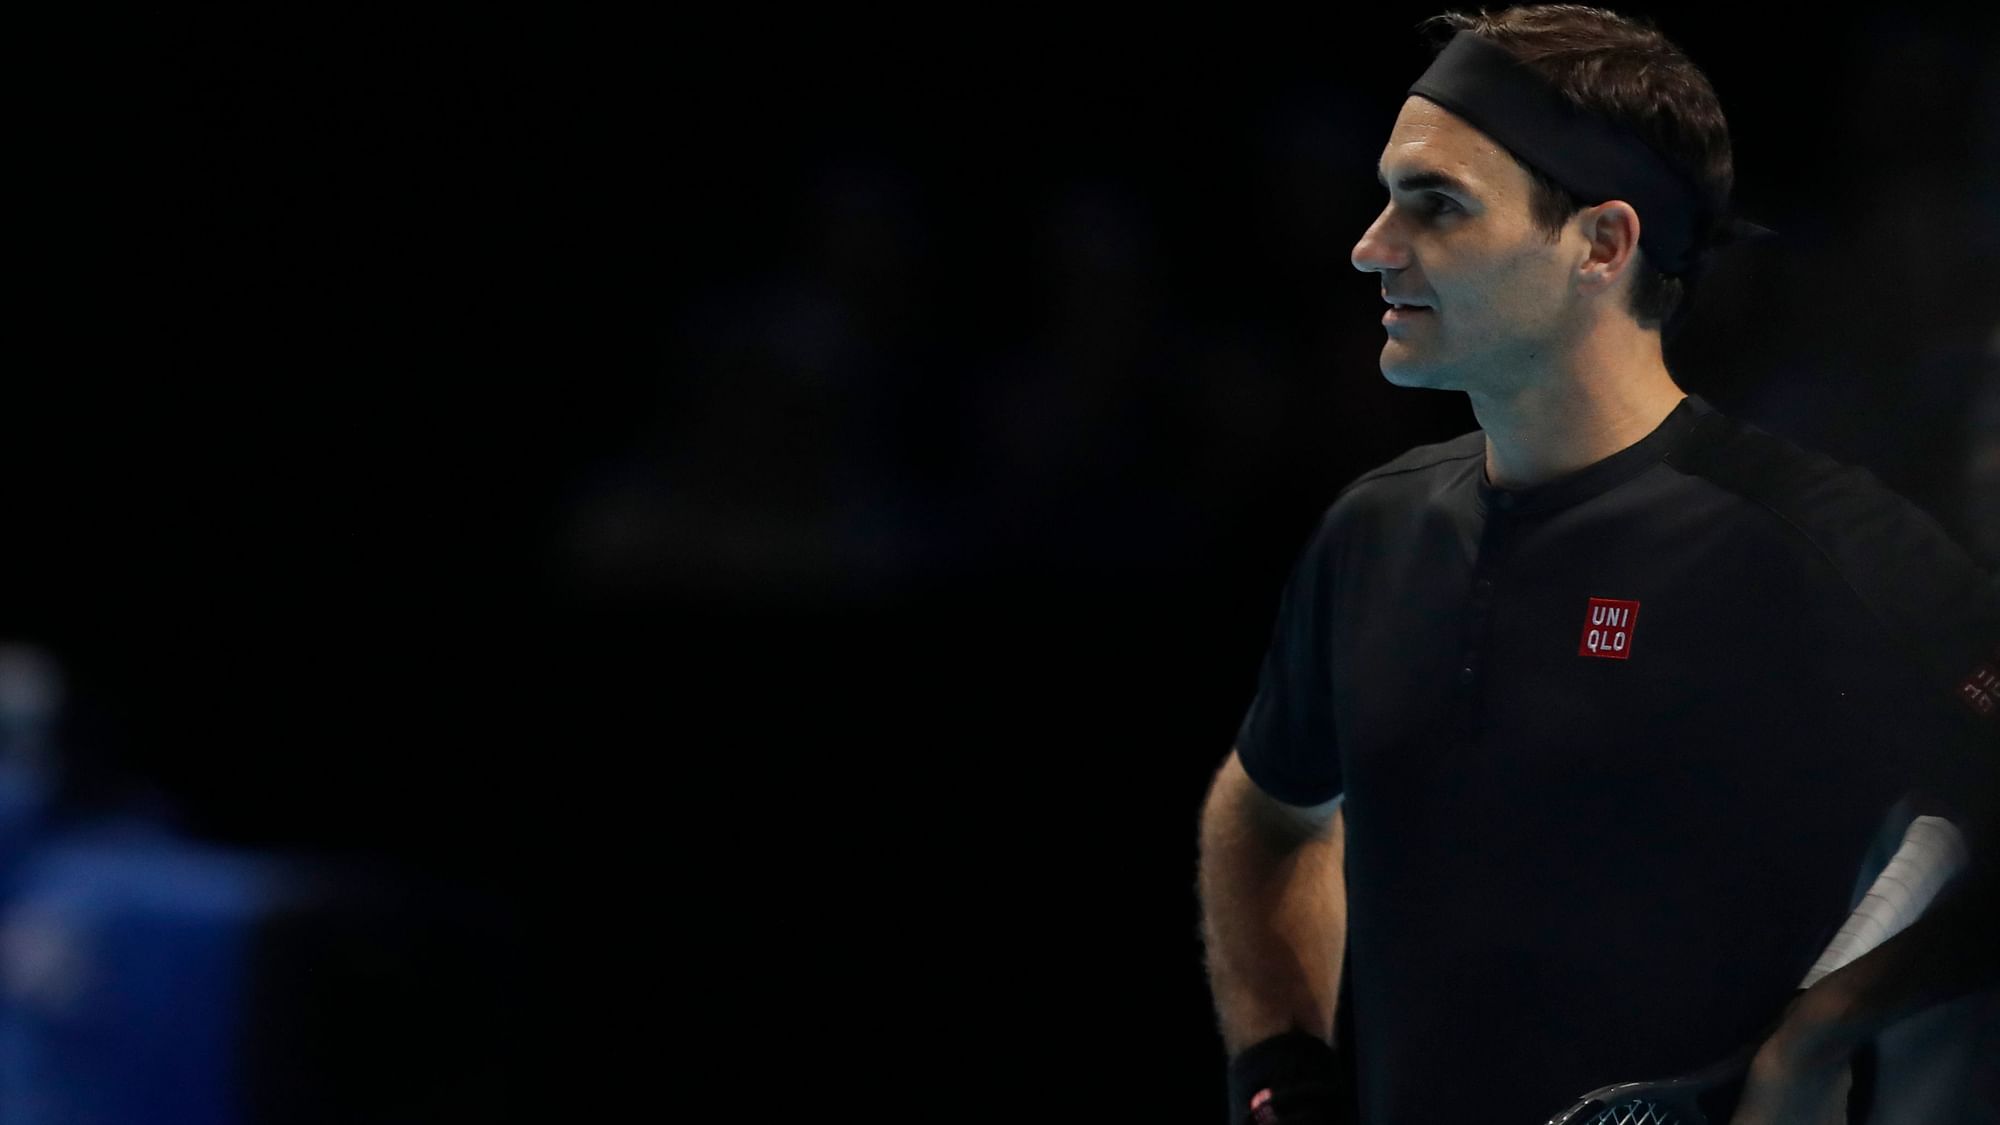 Six-time champion Roger Federer lost 7-5, 7-5 to Dominic Thiem on Sunday